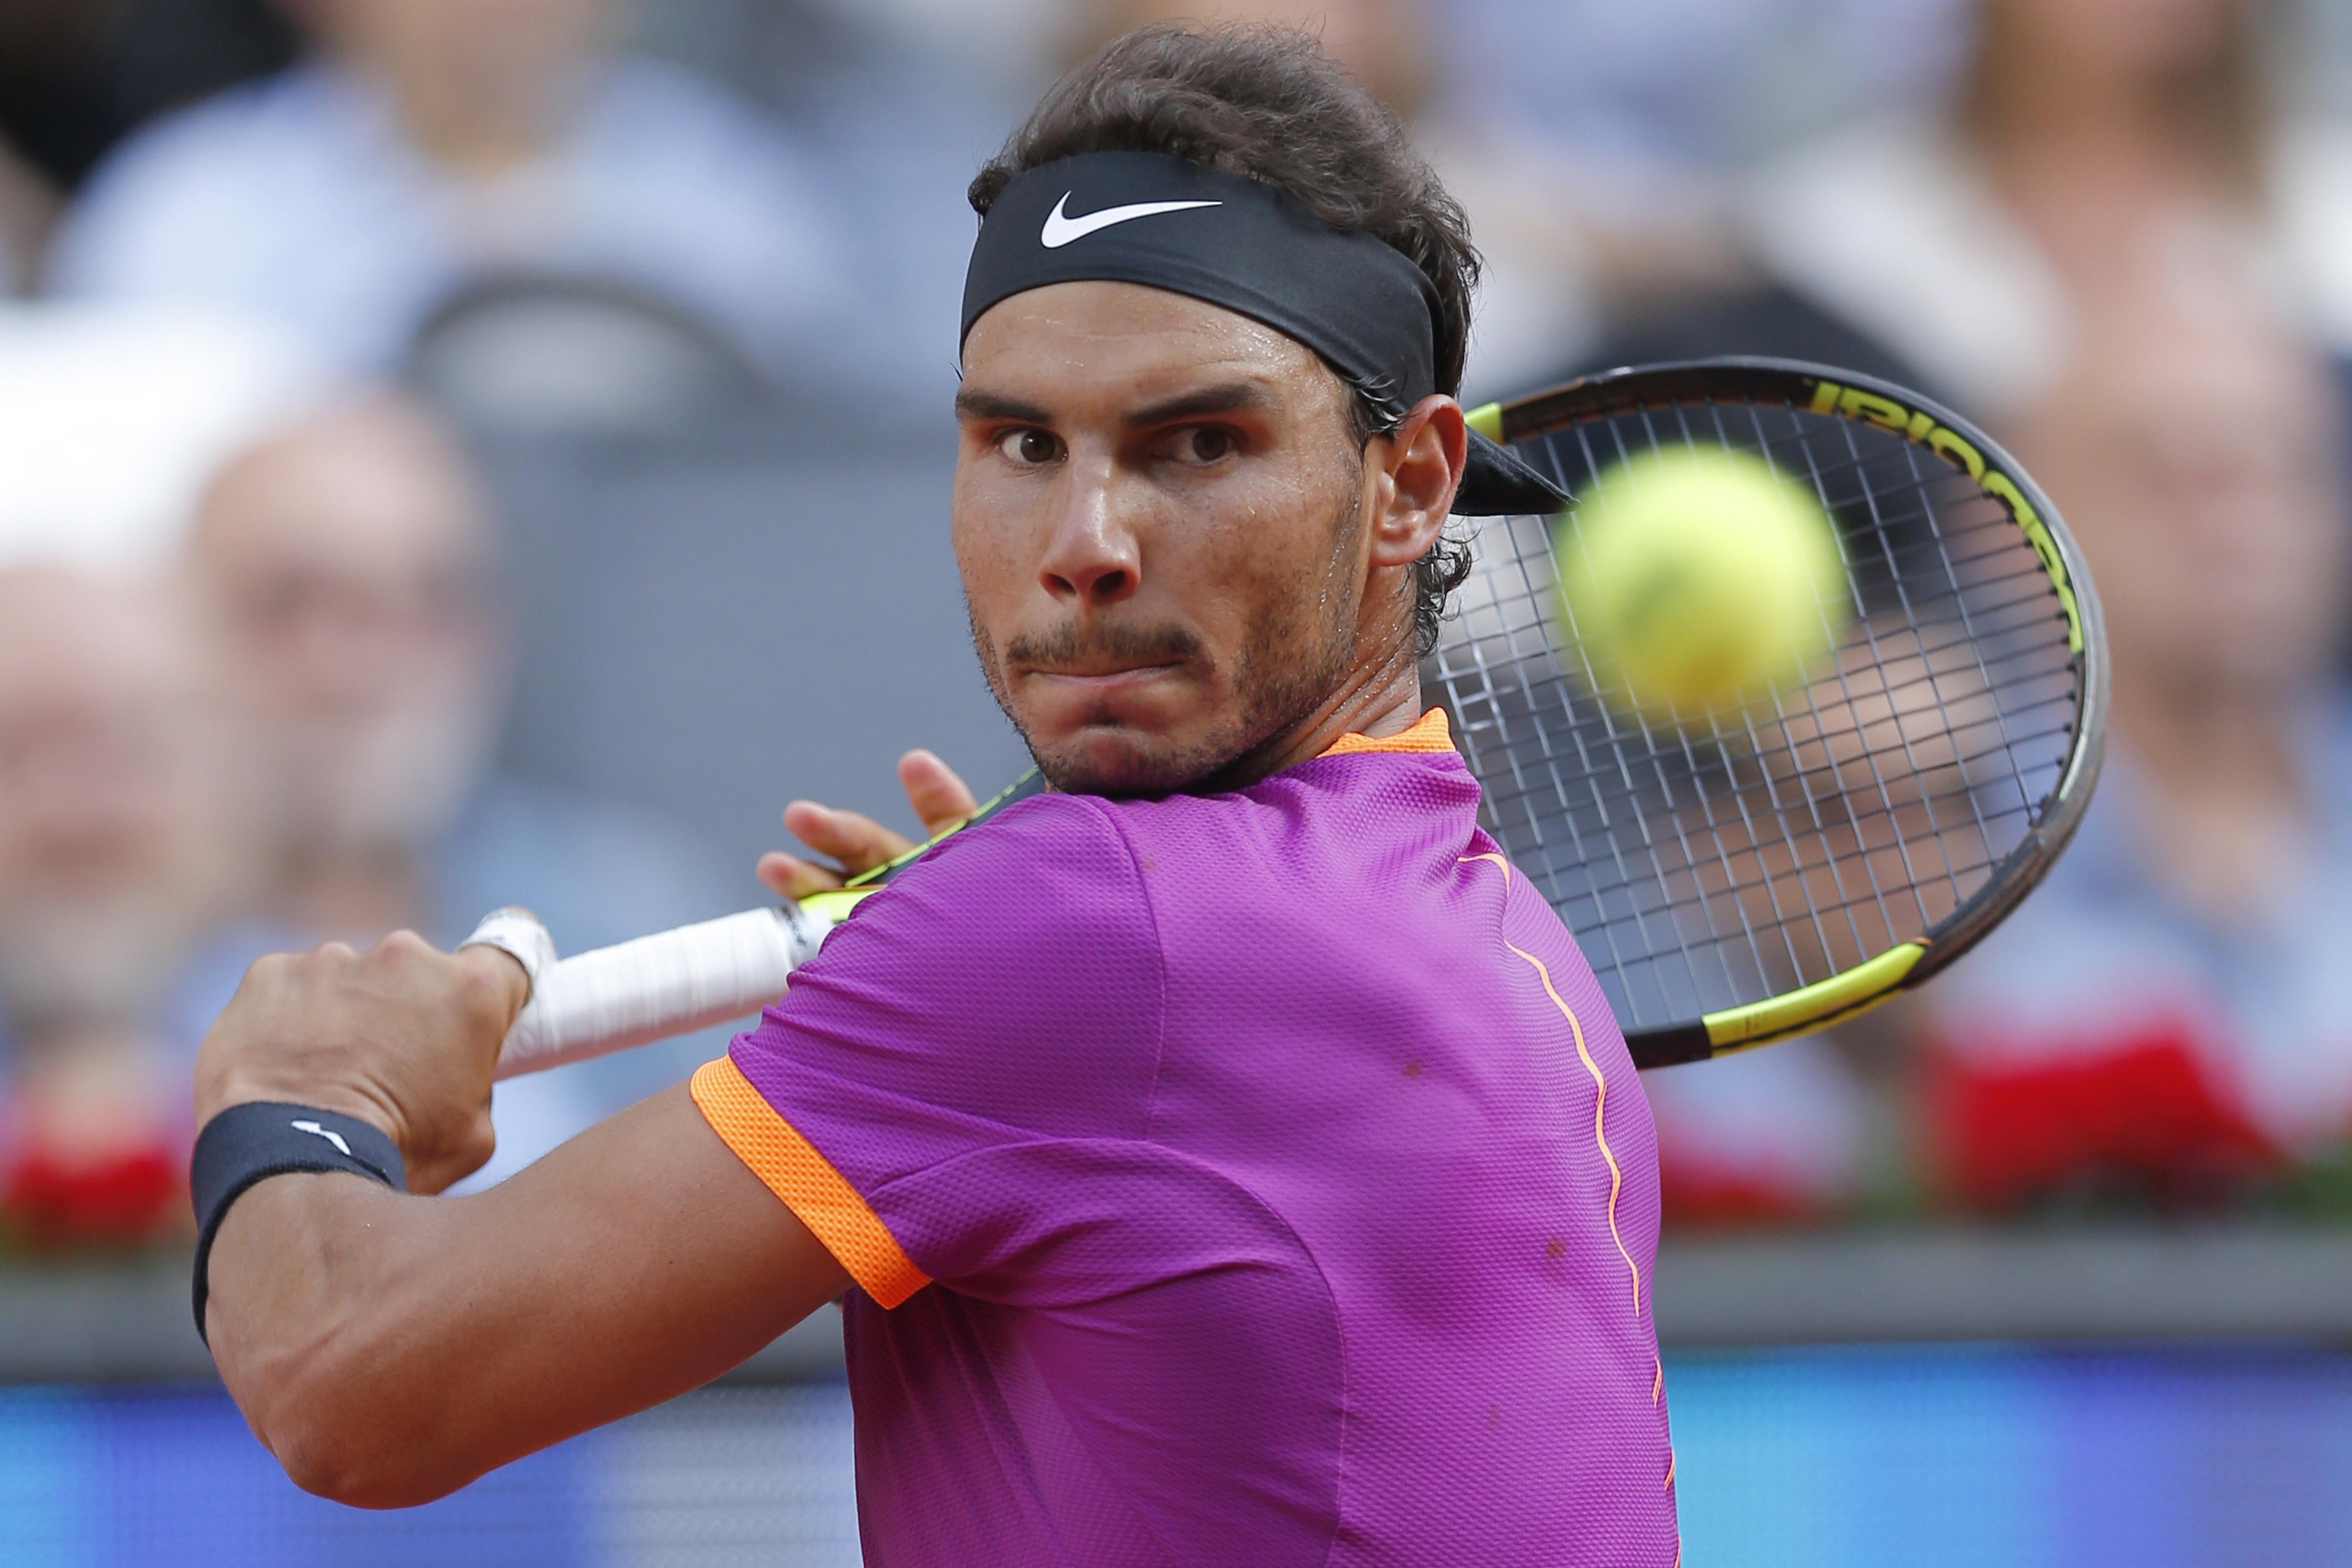 Nadal beats Thiem in Madrid, wins 3rd straight title | The Spokesman-Review